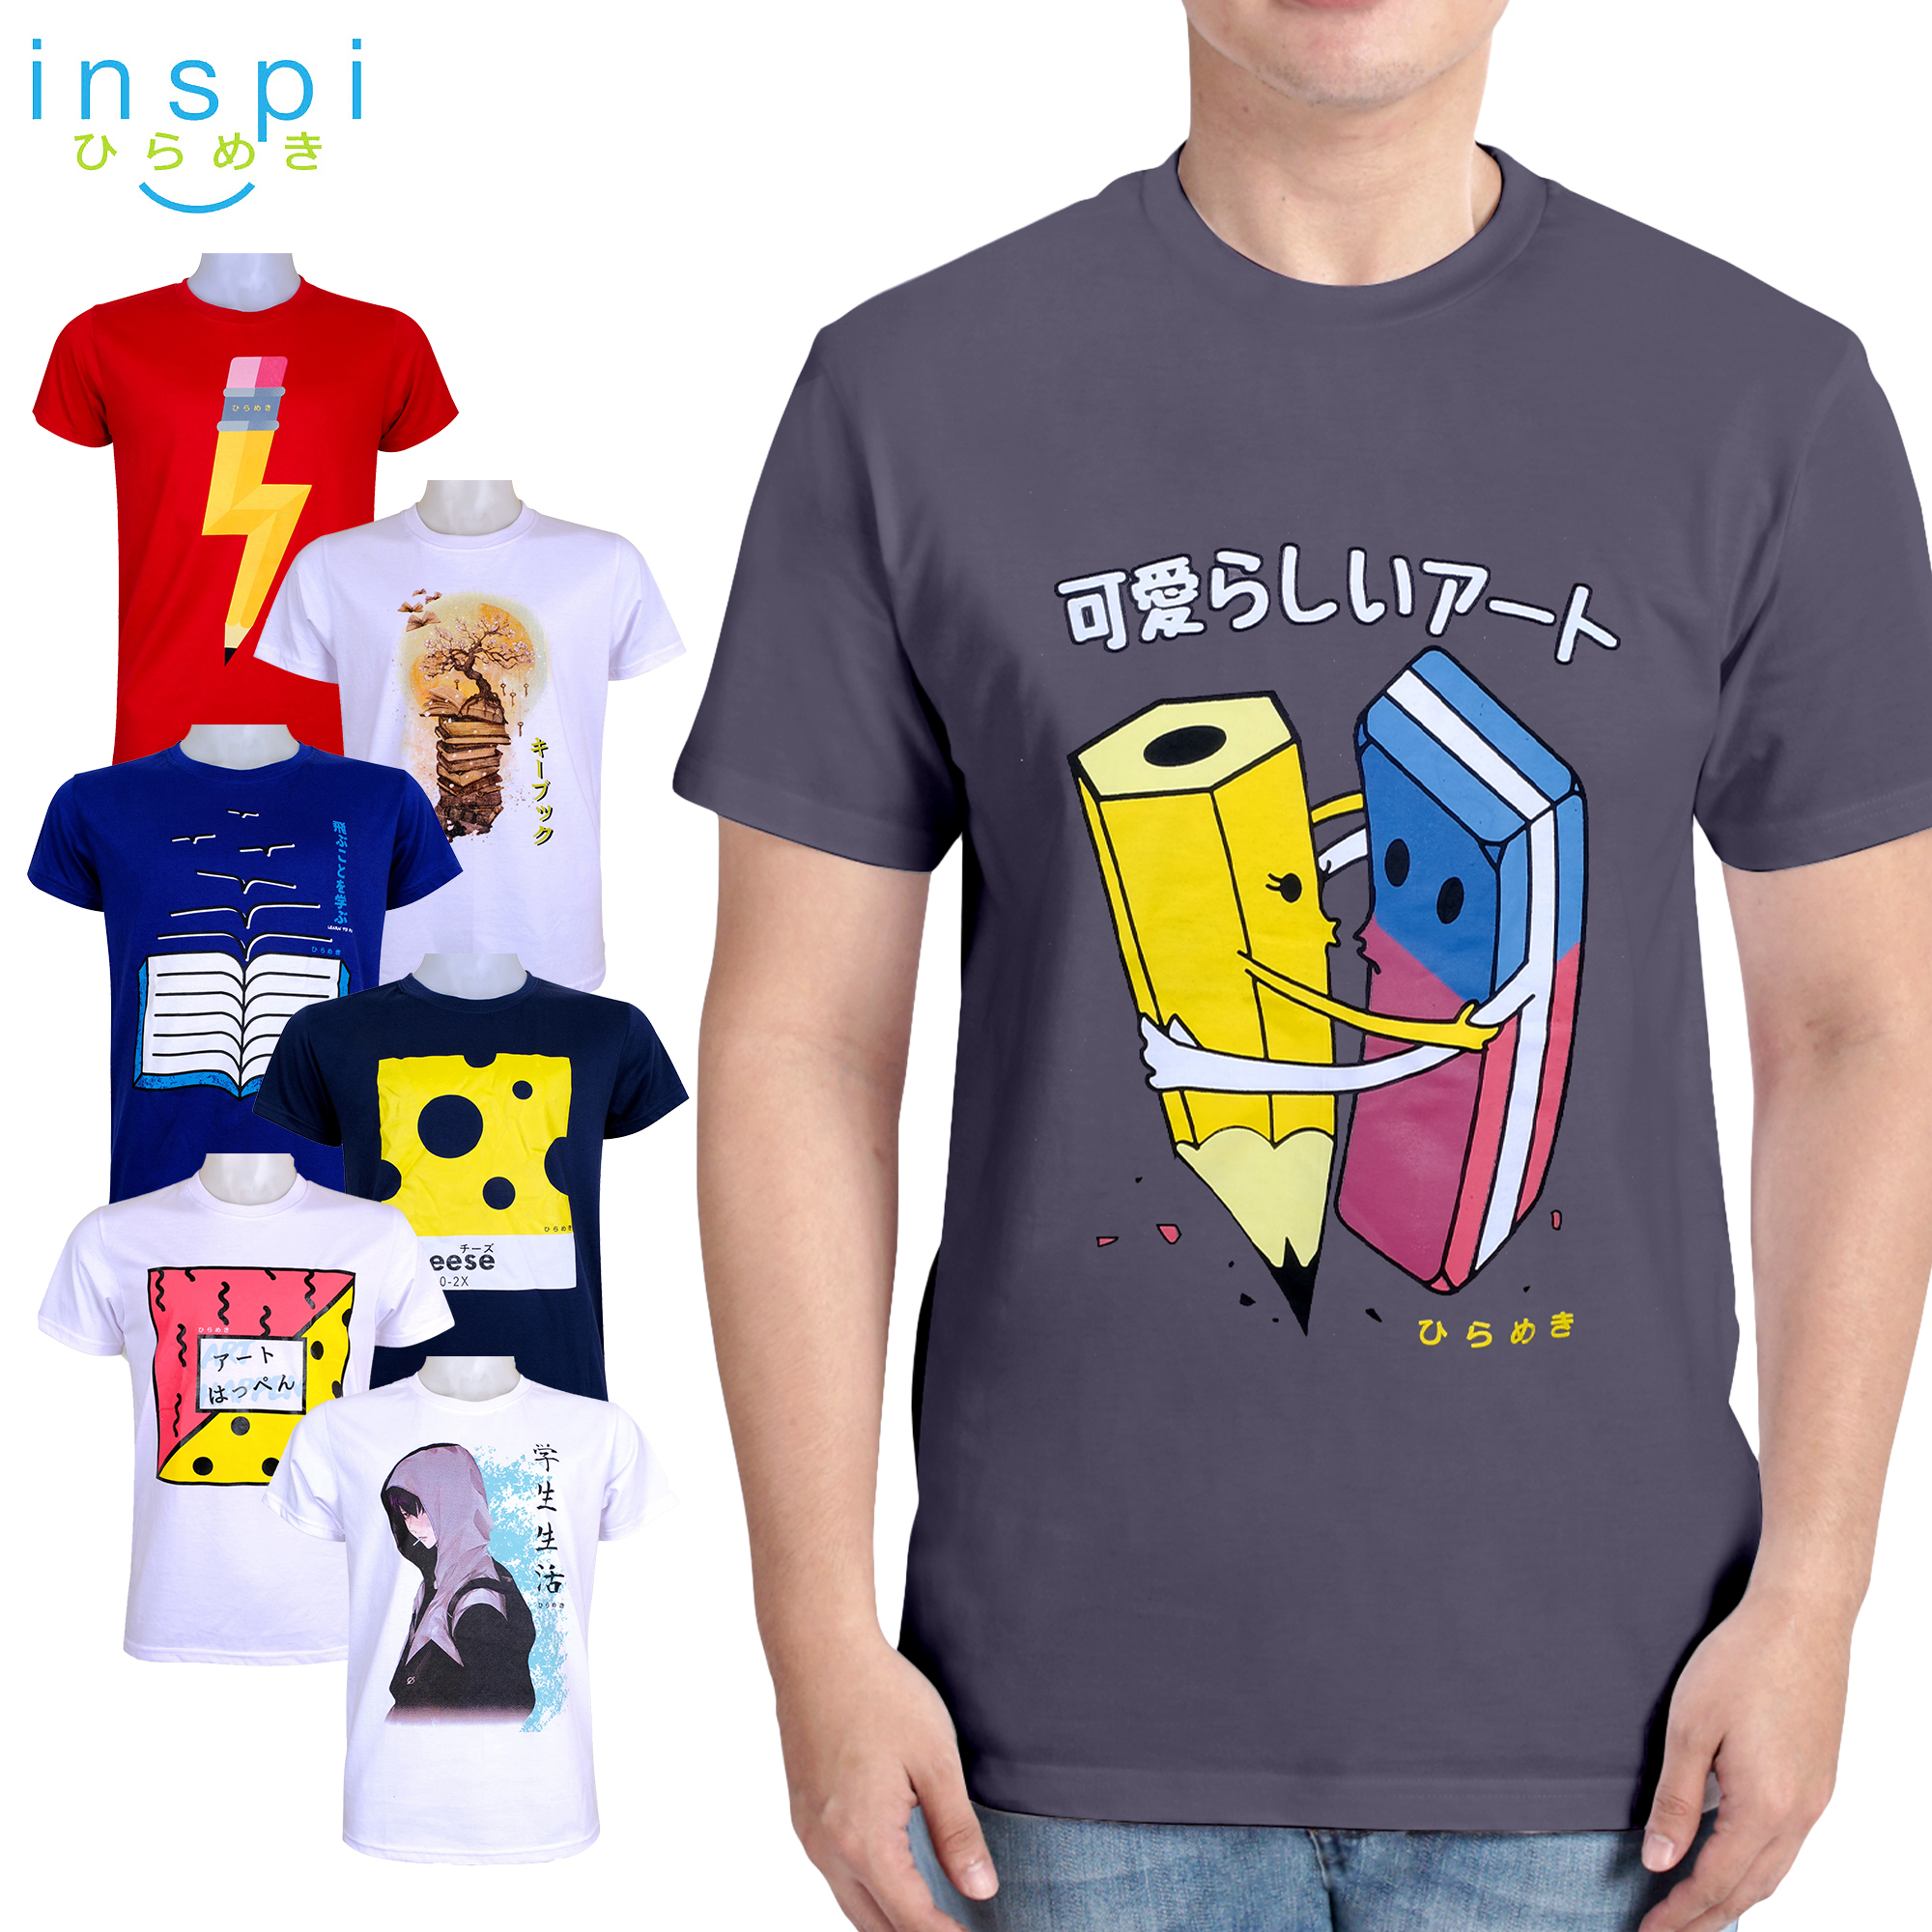 Buy T Shirts At Best Price Online Lazada Com Ph - roblox kids t shirts for boys and girls tops cartoon tee shirts pure cotton shopee philippines